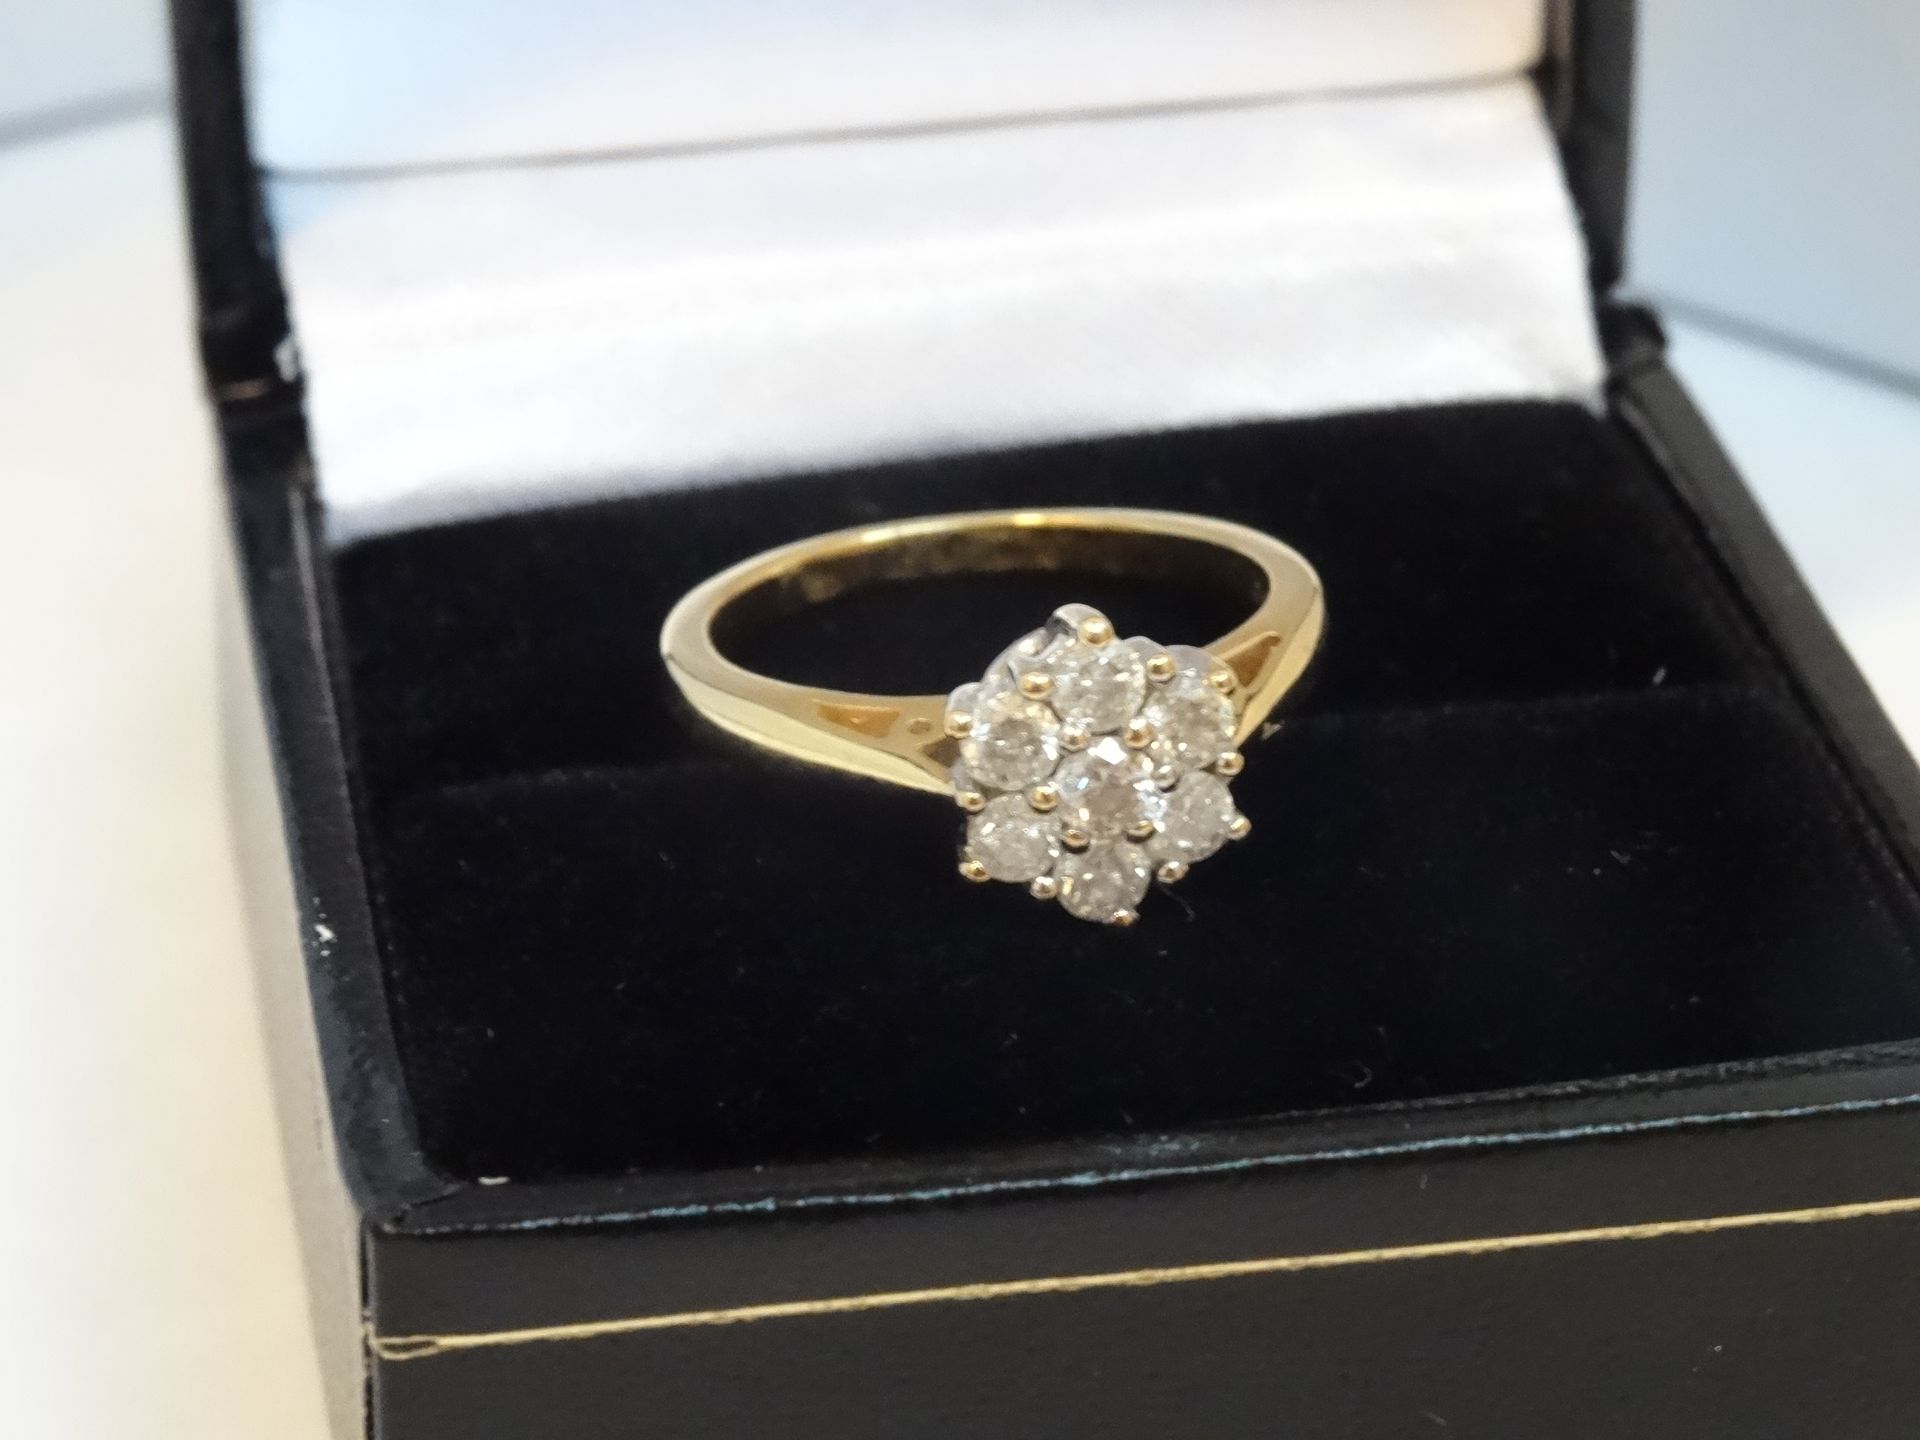 18ct Yellow & White Gold Ladies Diamond Cluster Ring, 0.5cts of diamonds, Insurance Valuation £1000 - Image 3 of 5